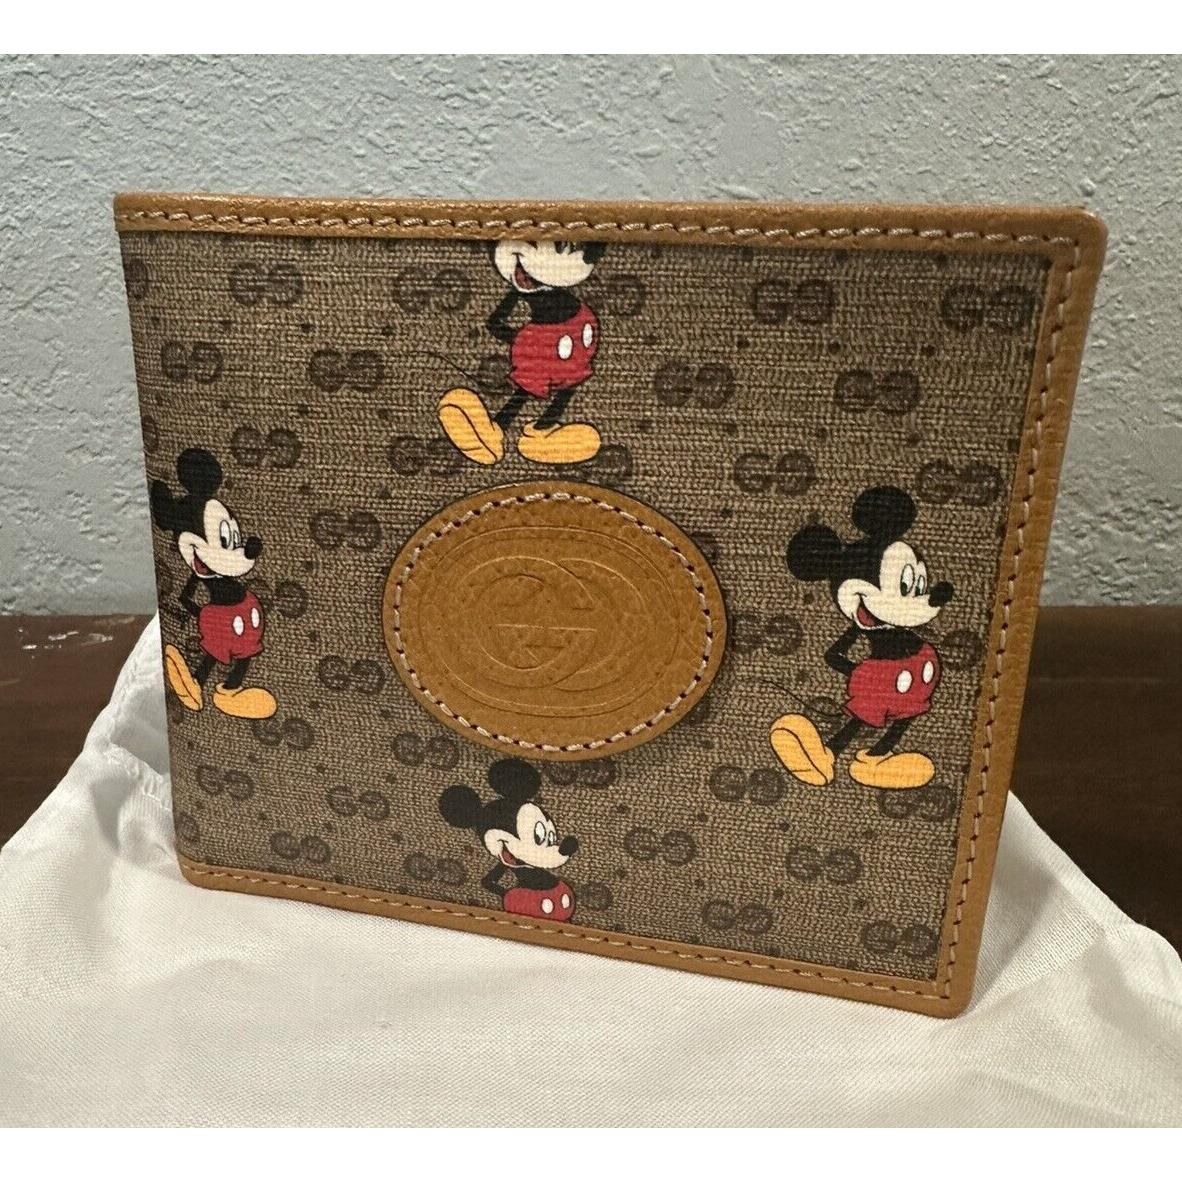 Gucci x Disney Mickey GG Supreme Bifold Wallet Made in Italy